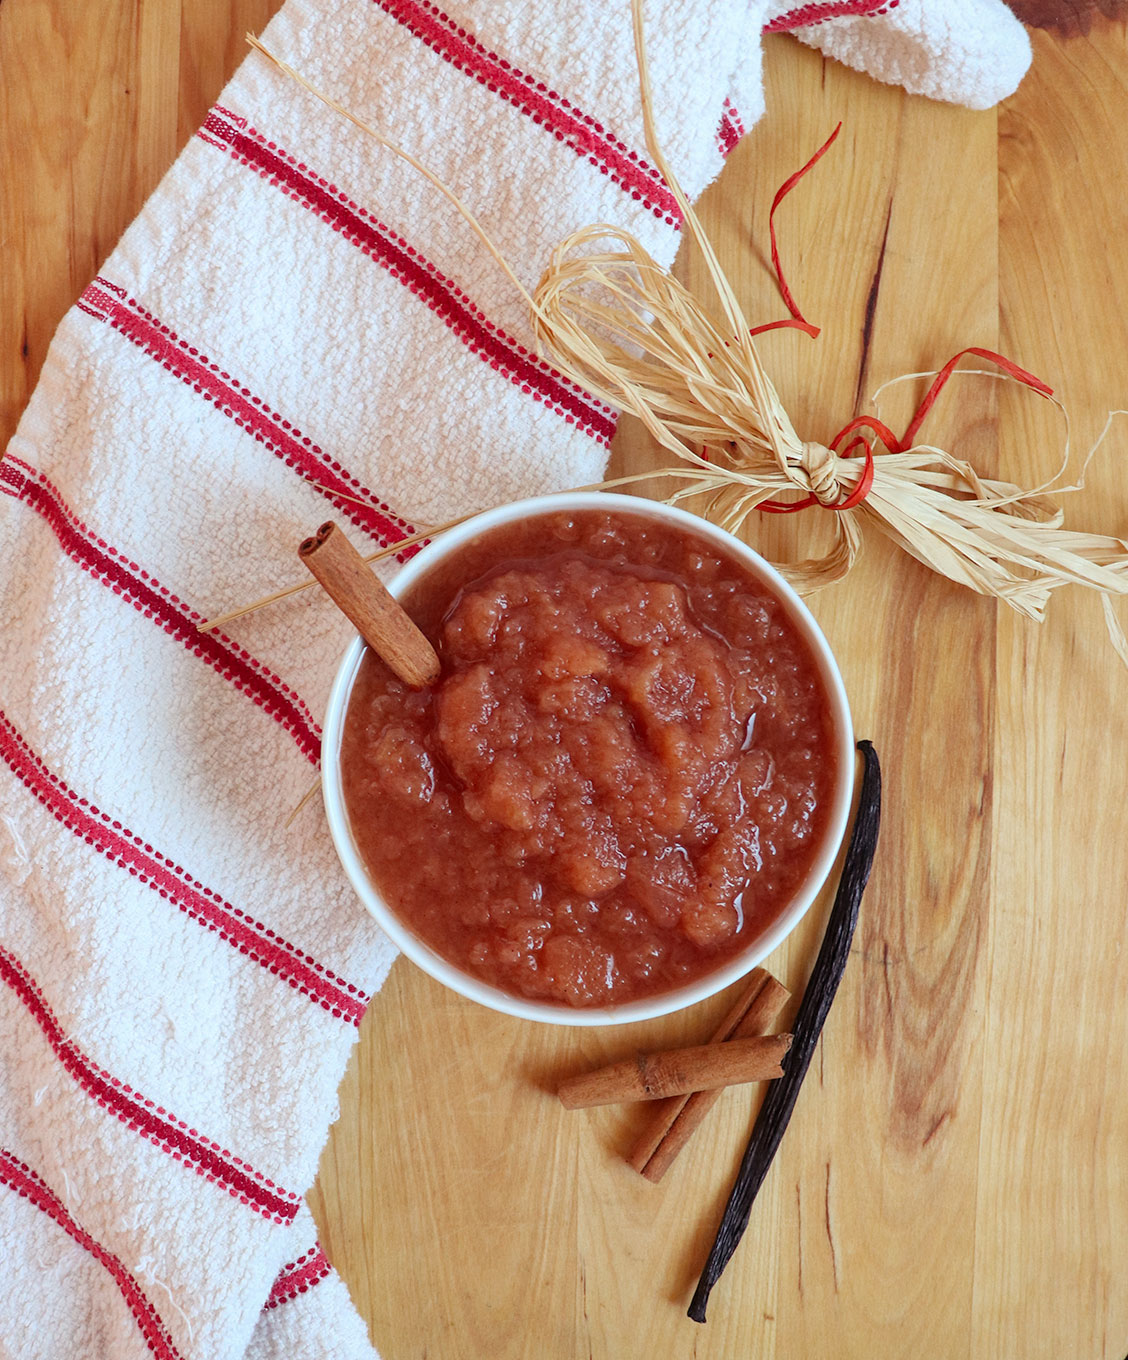 homemade apple sauce for the Instant Pot from Albuquerque Moms Blog